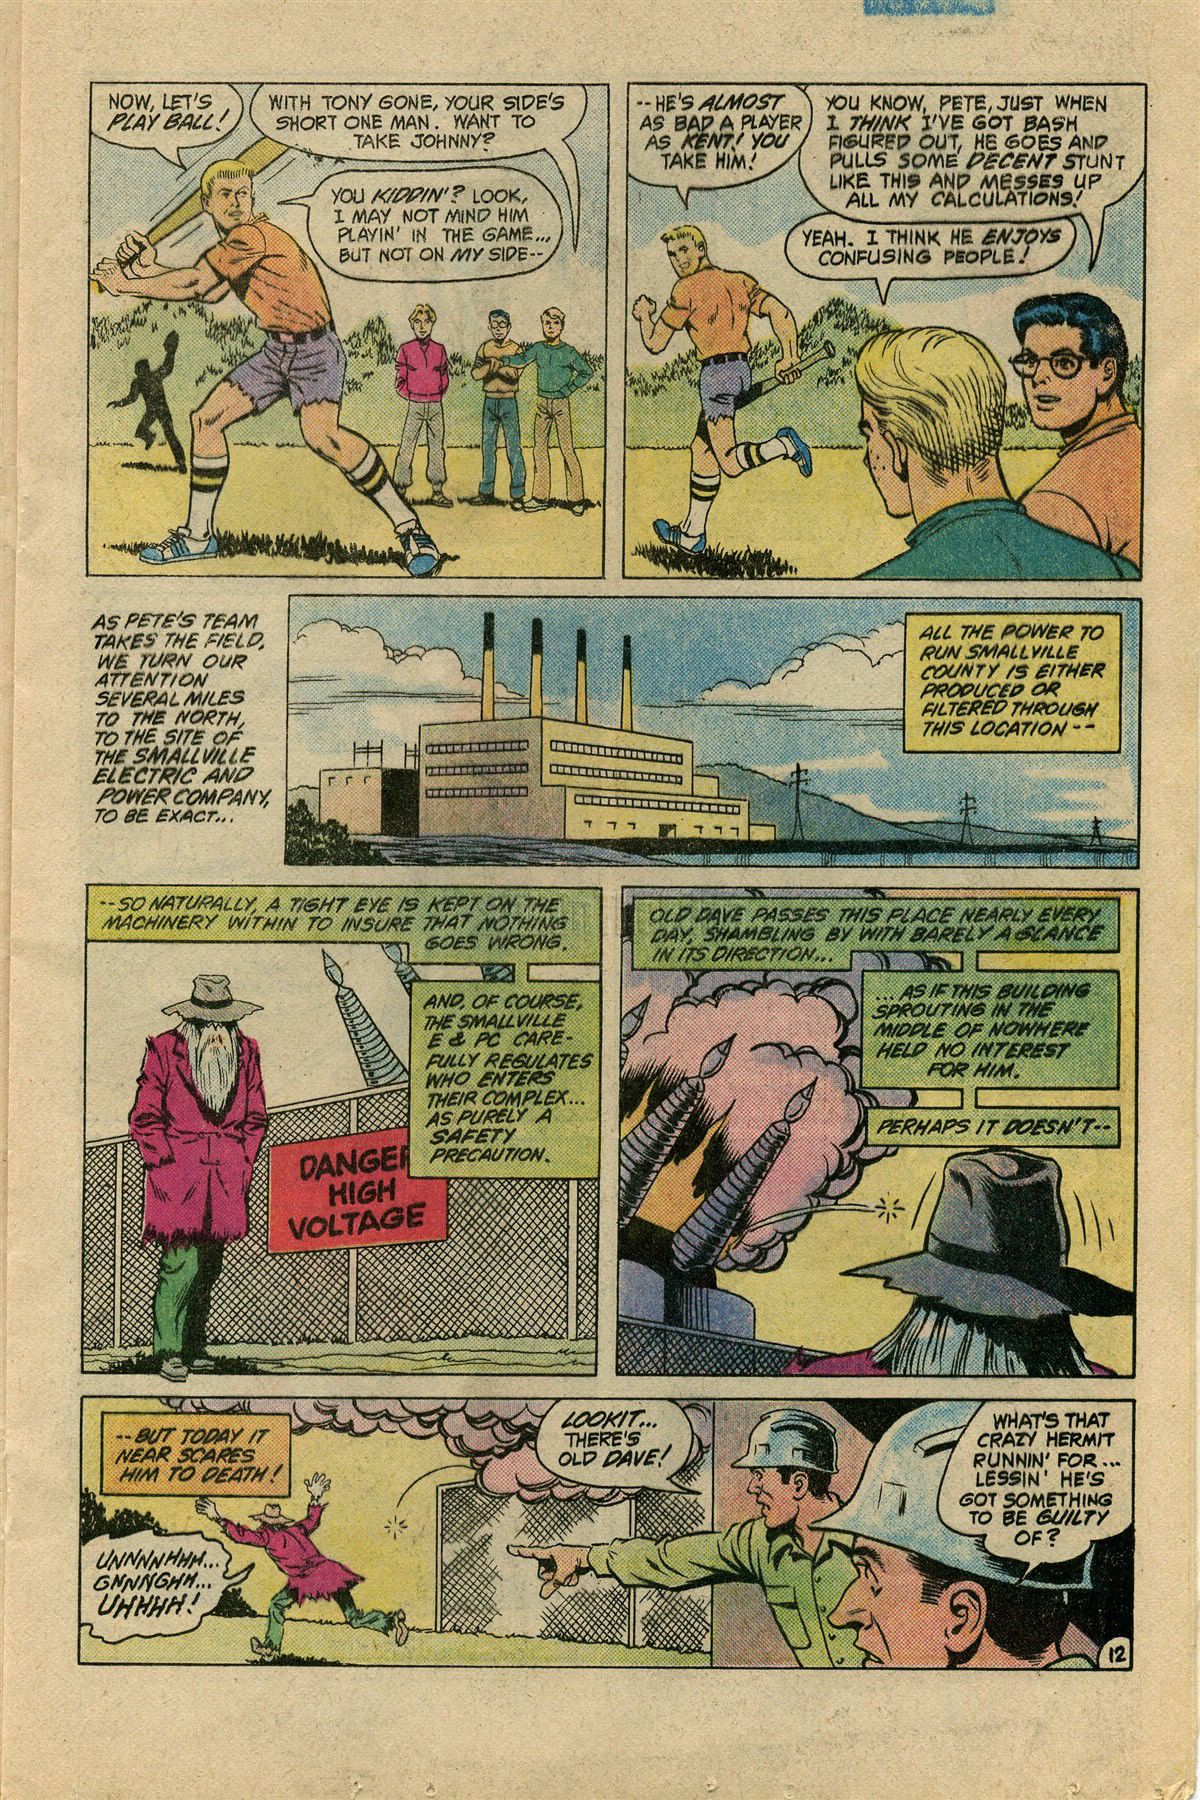 The New Adventures of Superboy 52 Page 15